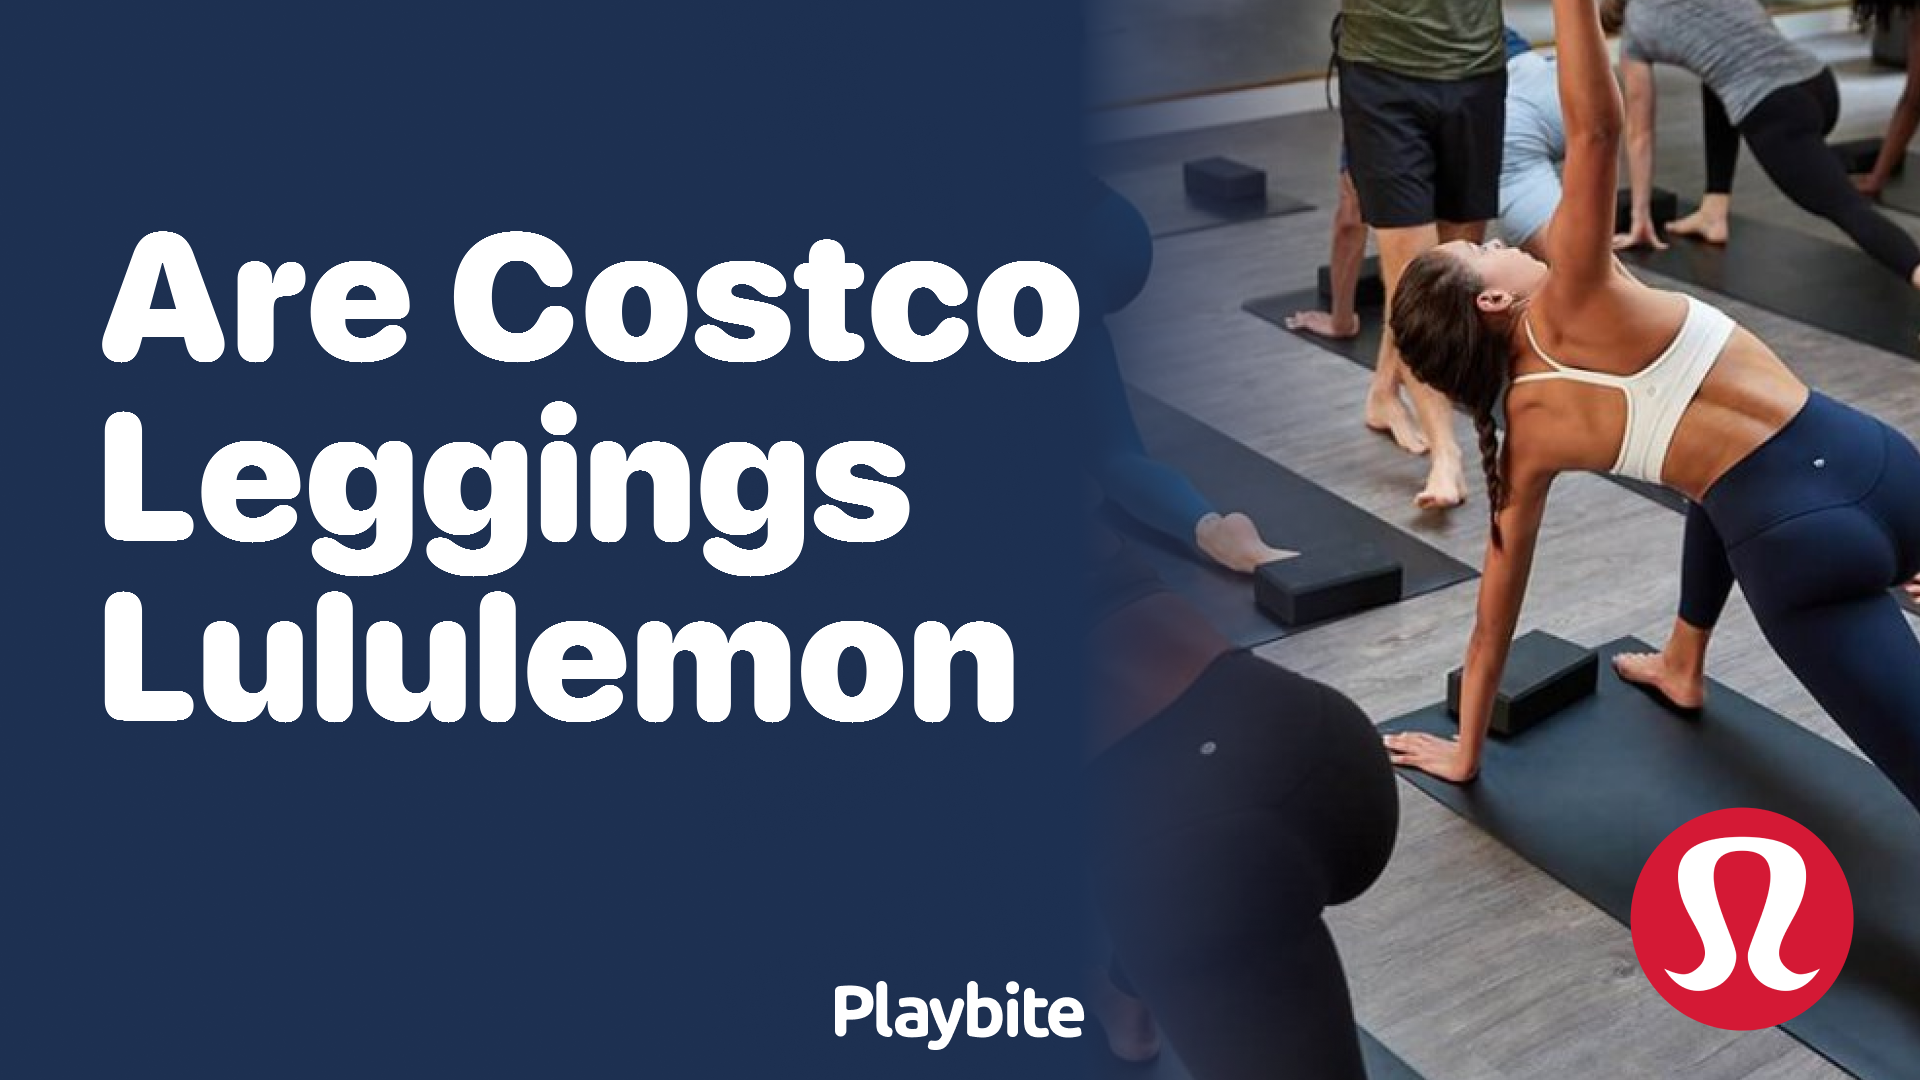 Are Costco Yoga Pants Made by Lululemon? - Playbite